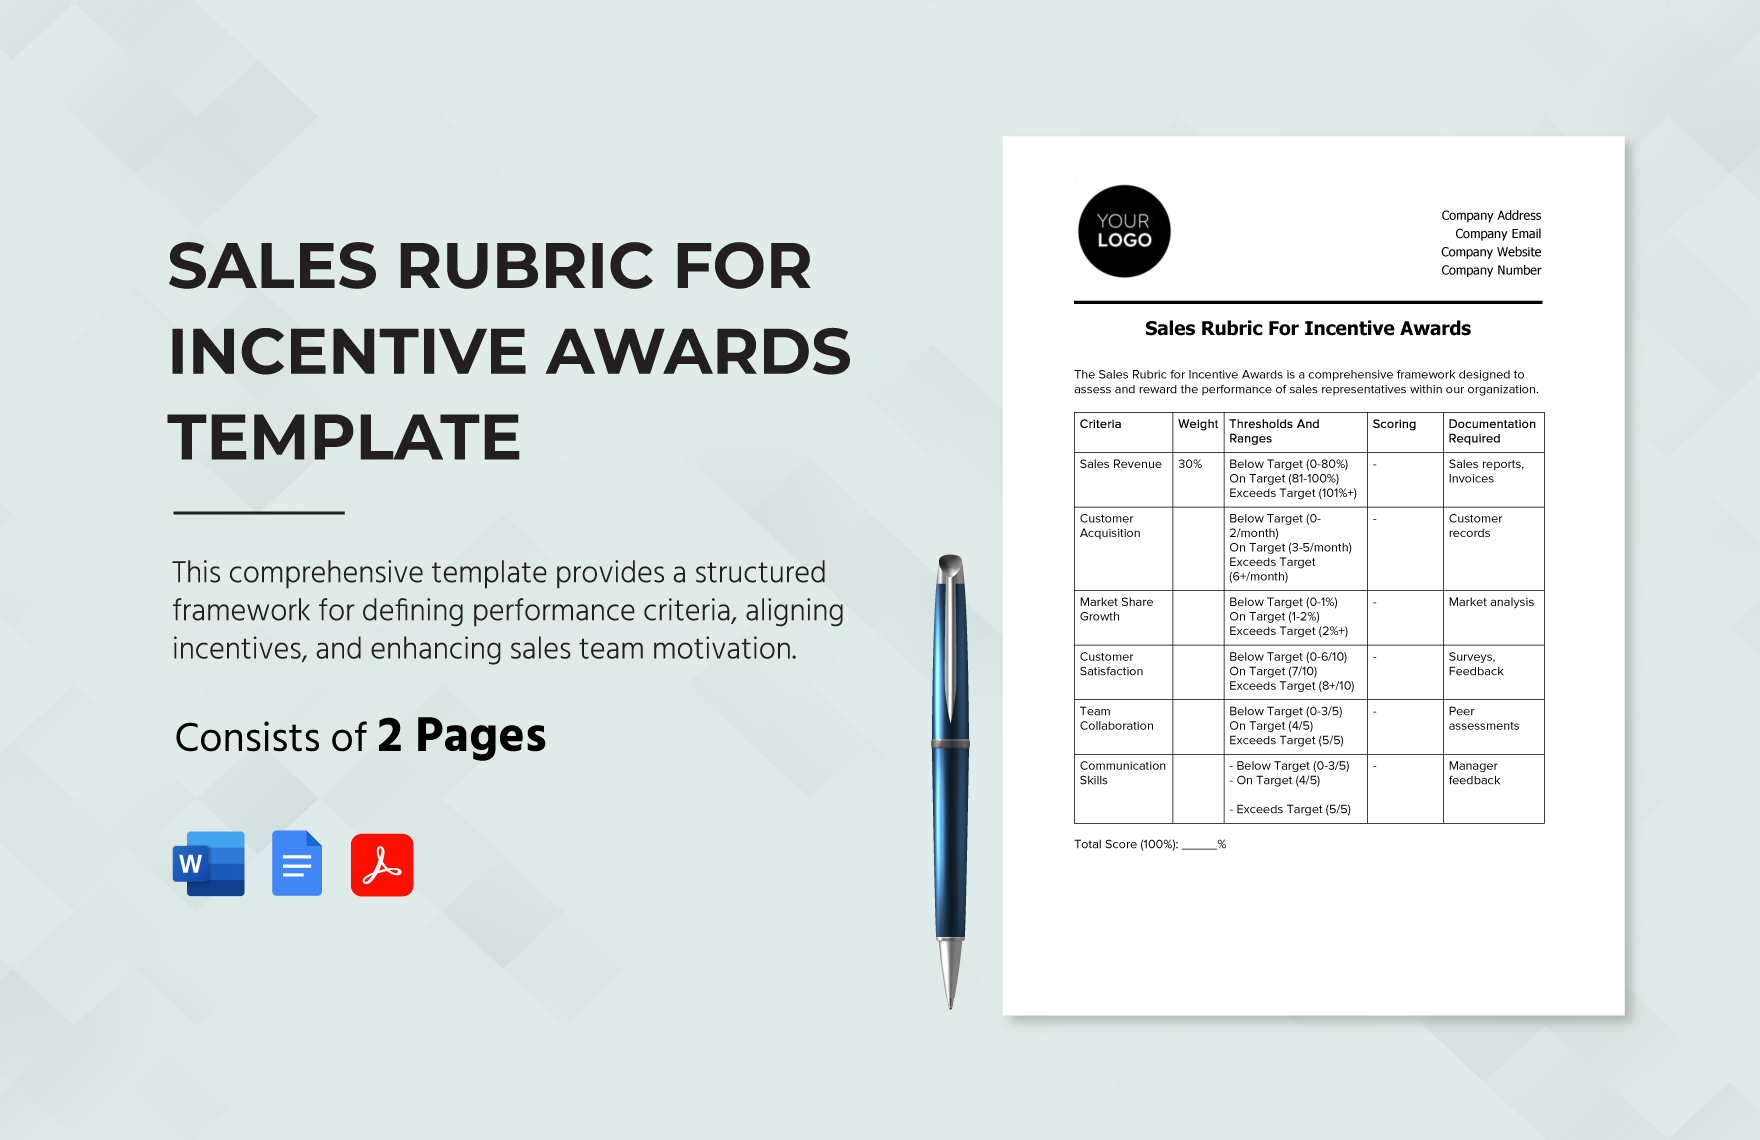 Sales Rubric for Incentive Awards Template